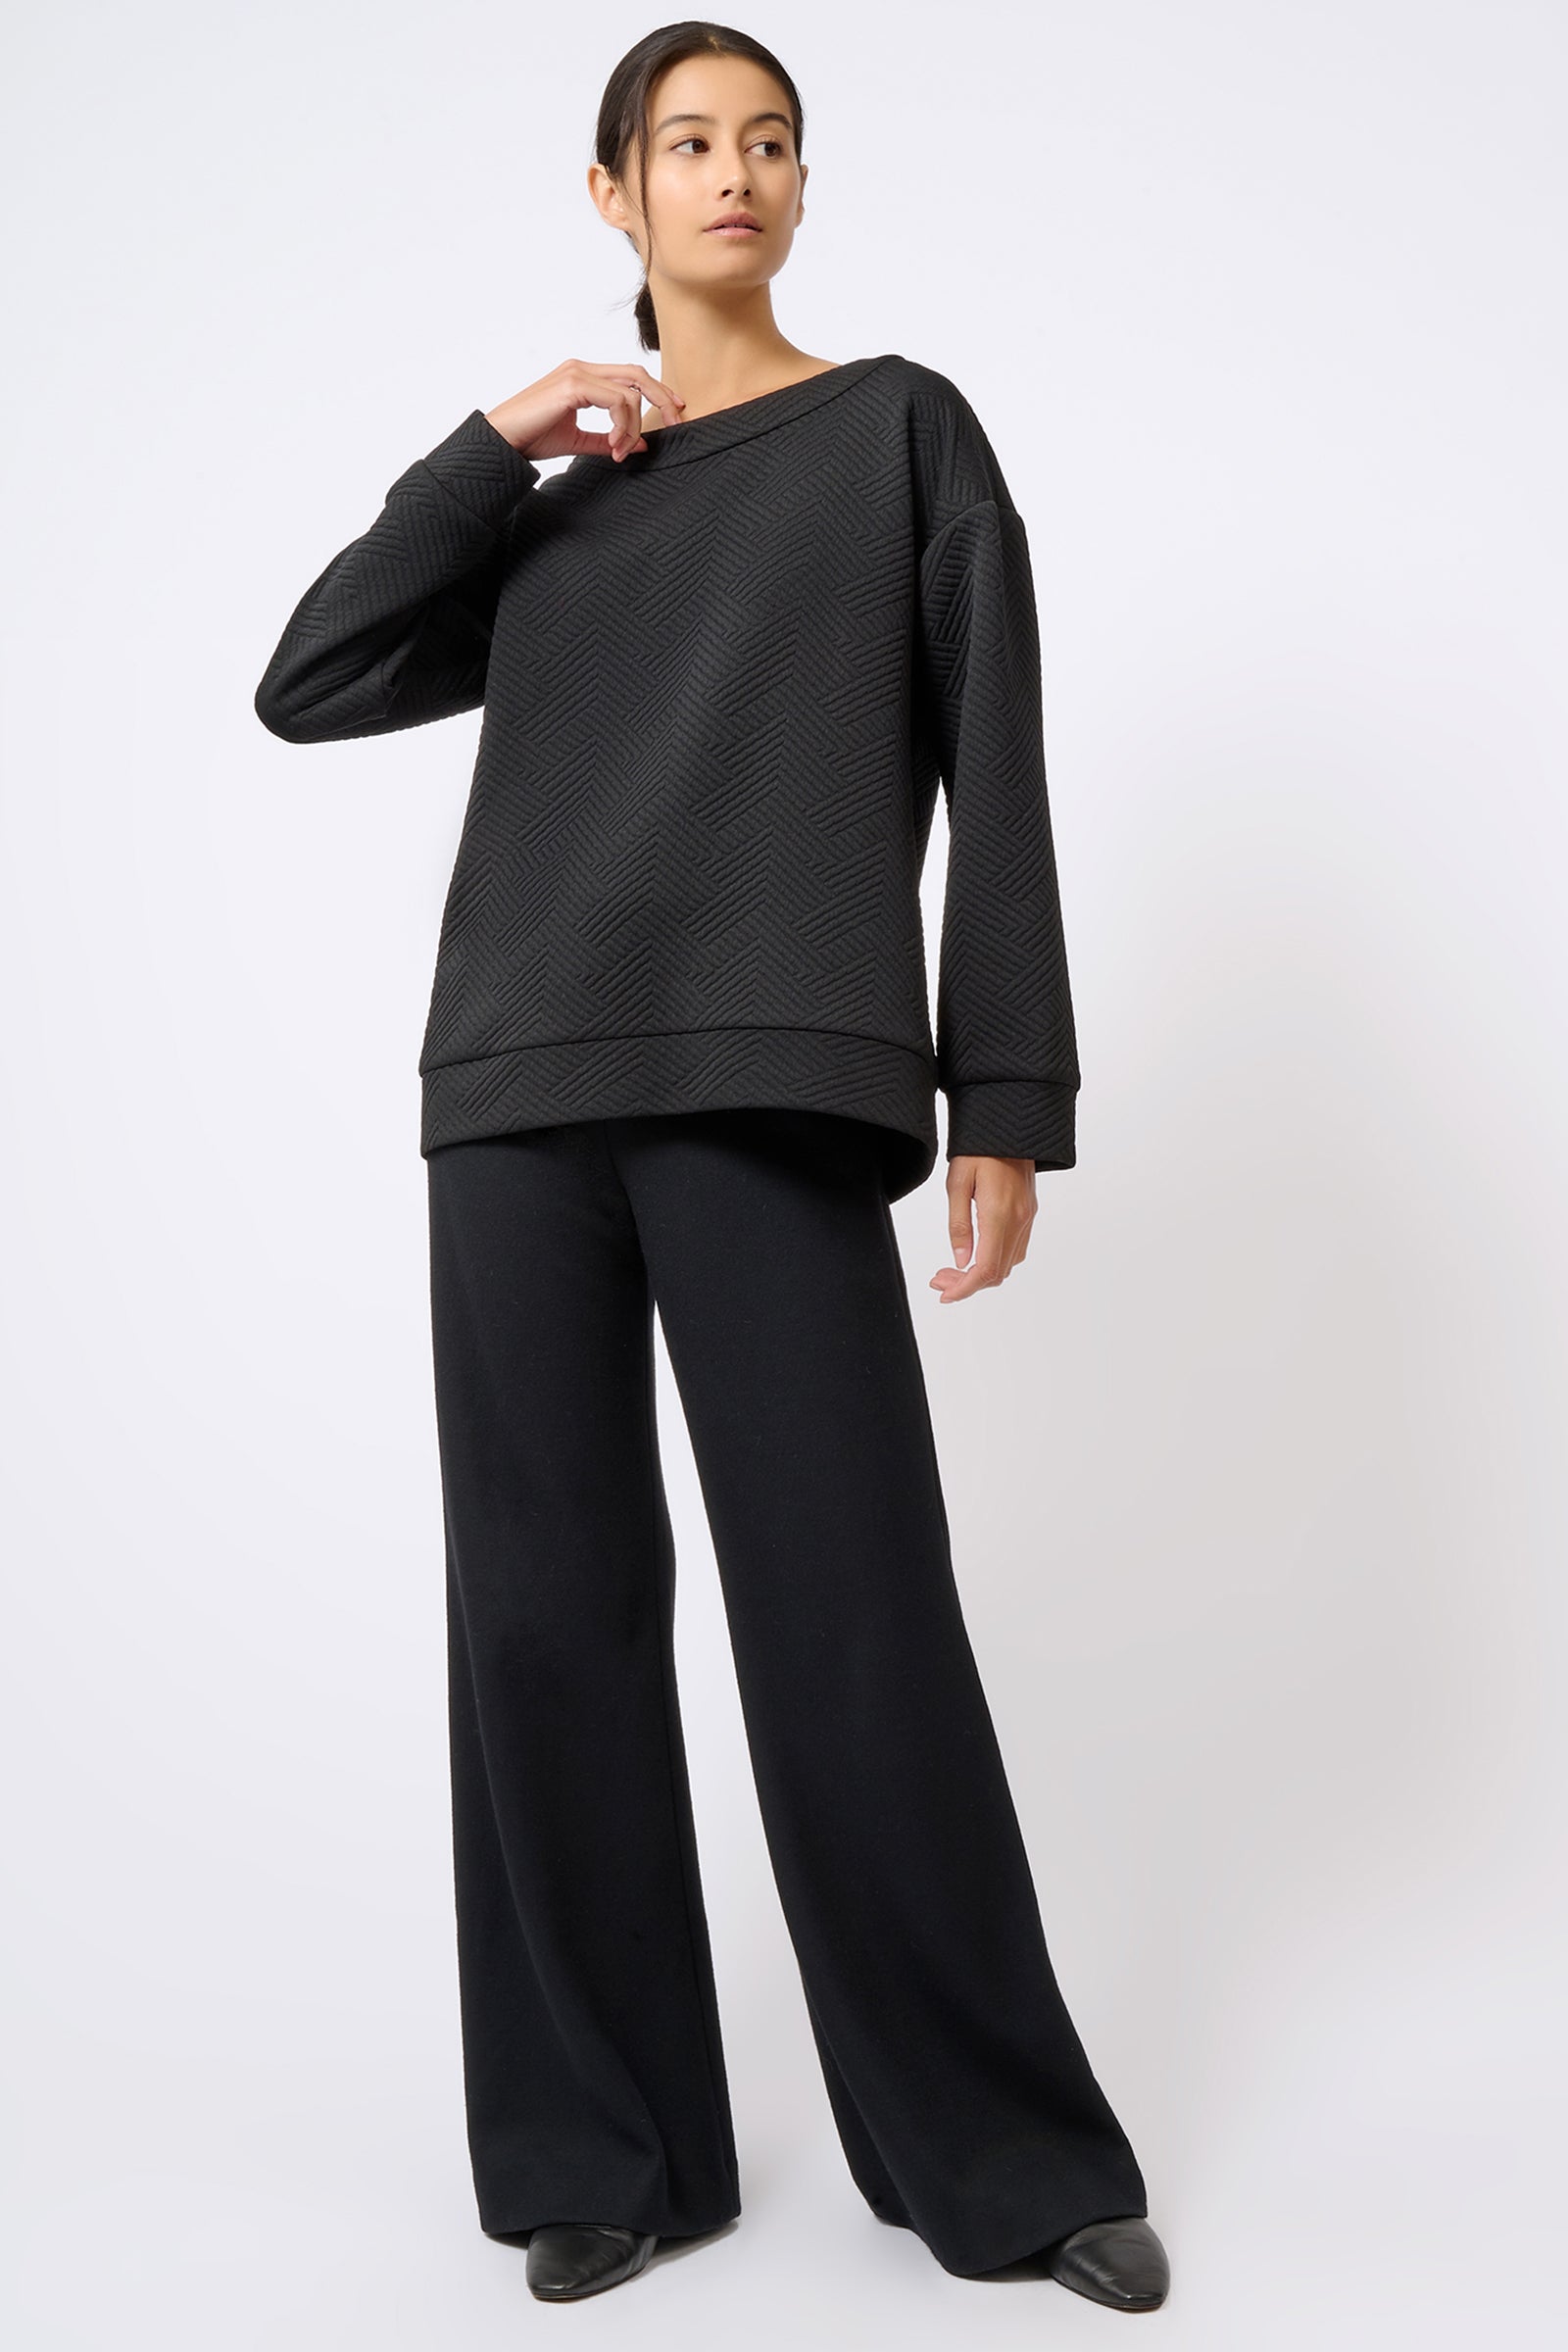 Kal Rieman Carmen Banded Sweatshirt in Black Escher Knit on Model with Hand on Collar Full Front View